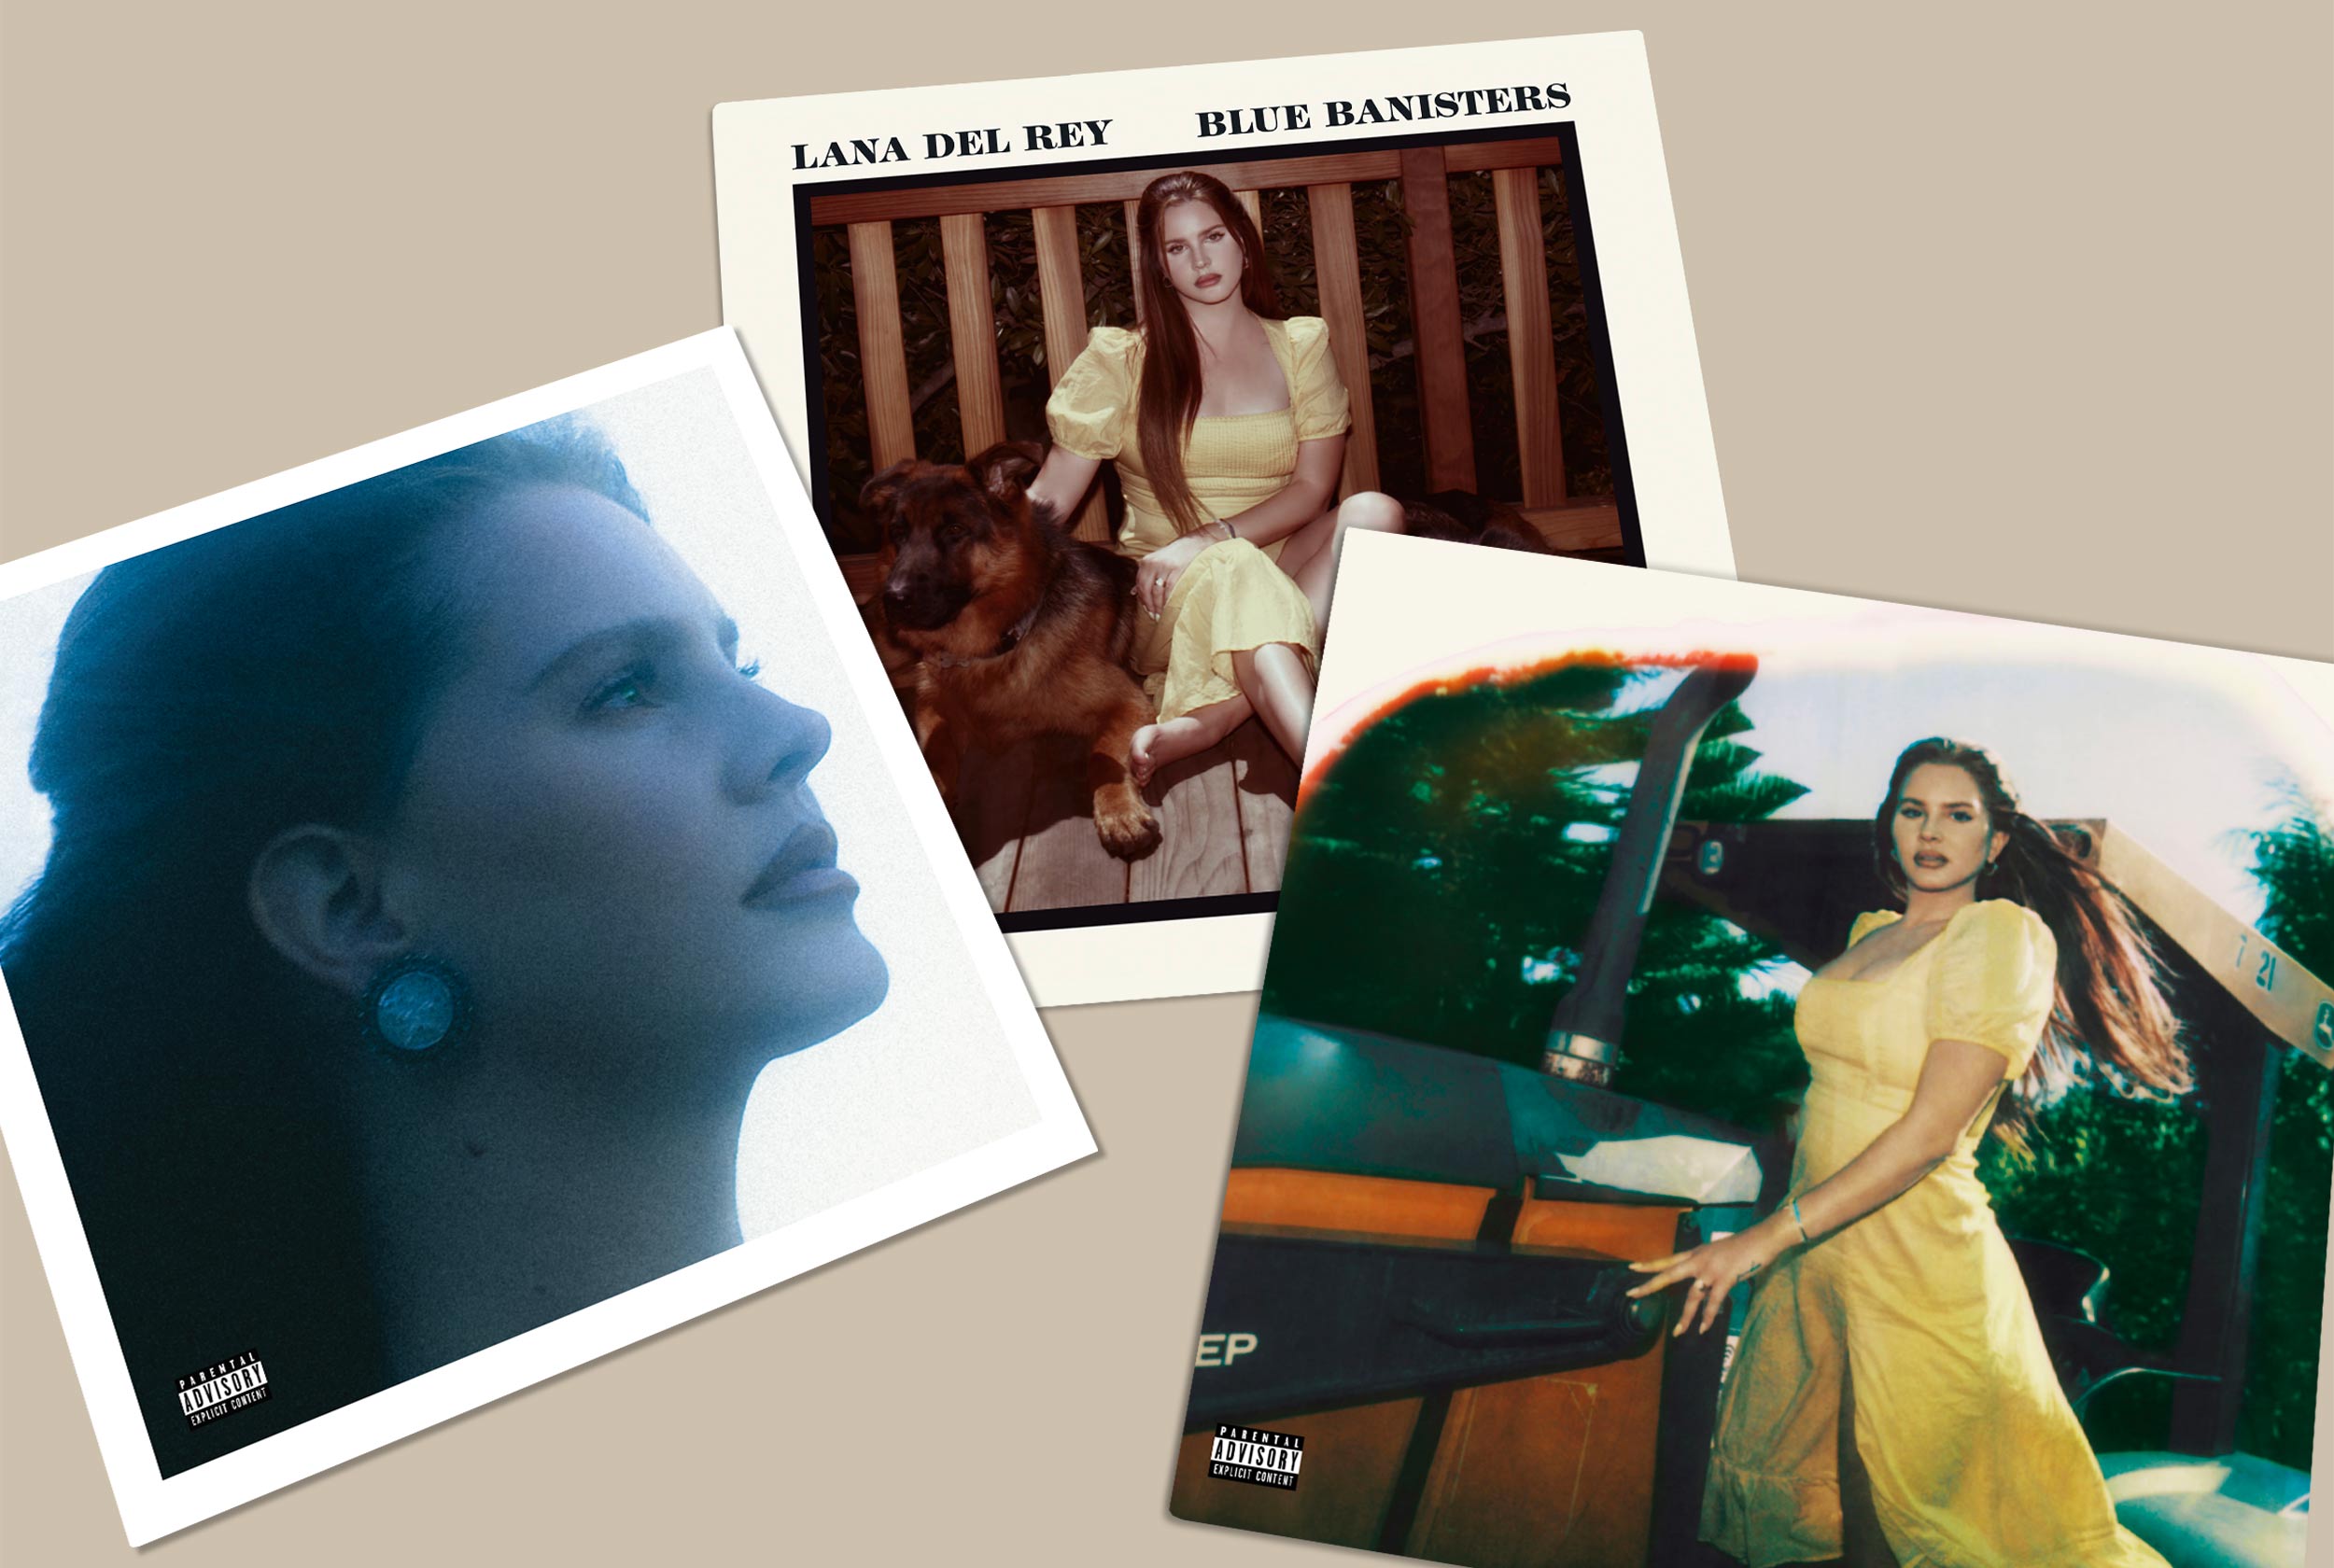 A collage of photos of singer-songwriter Lana Del Rey, including her album covers - Lana Del Rey